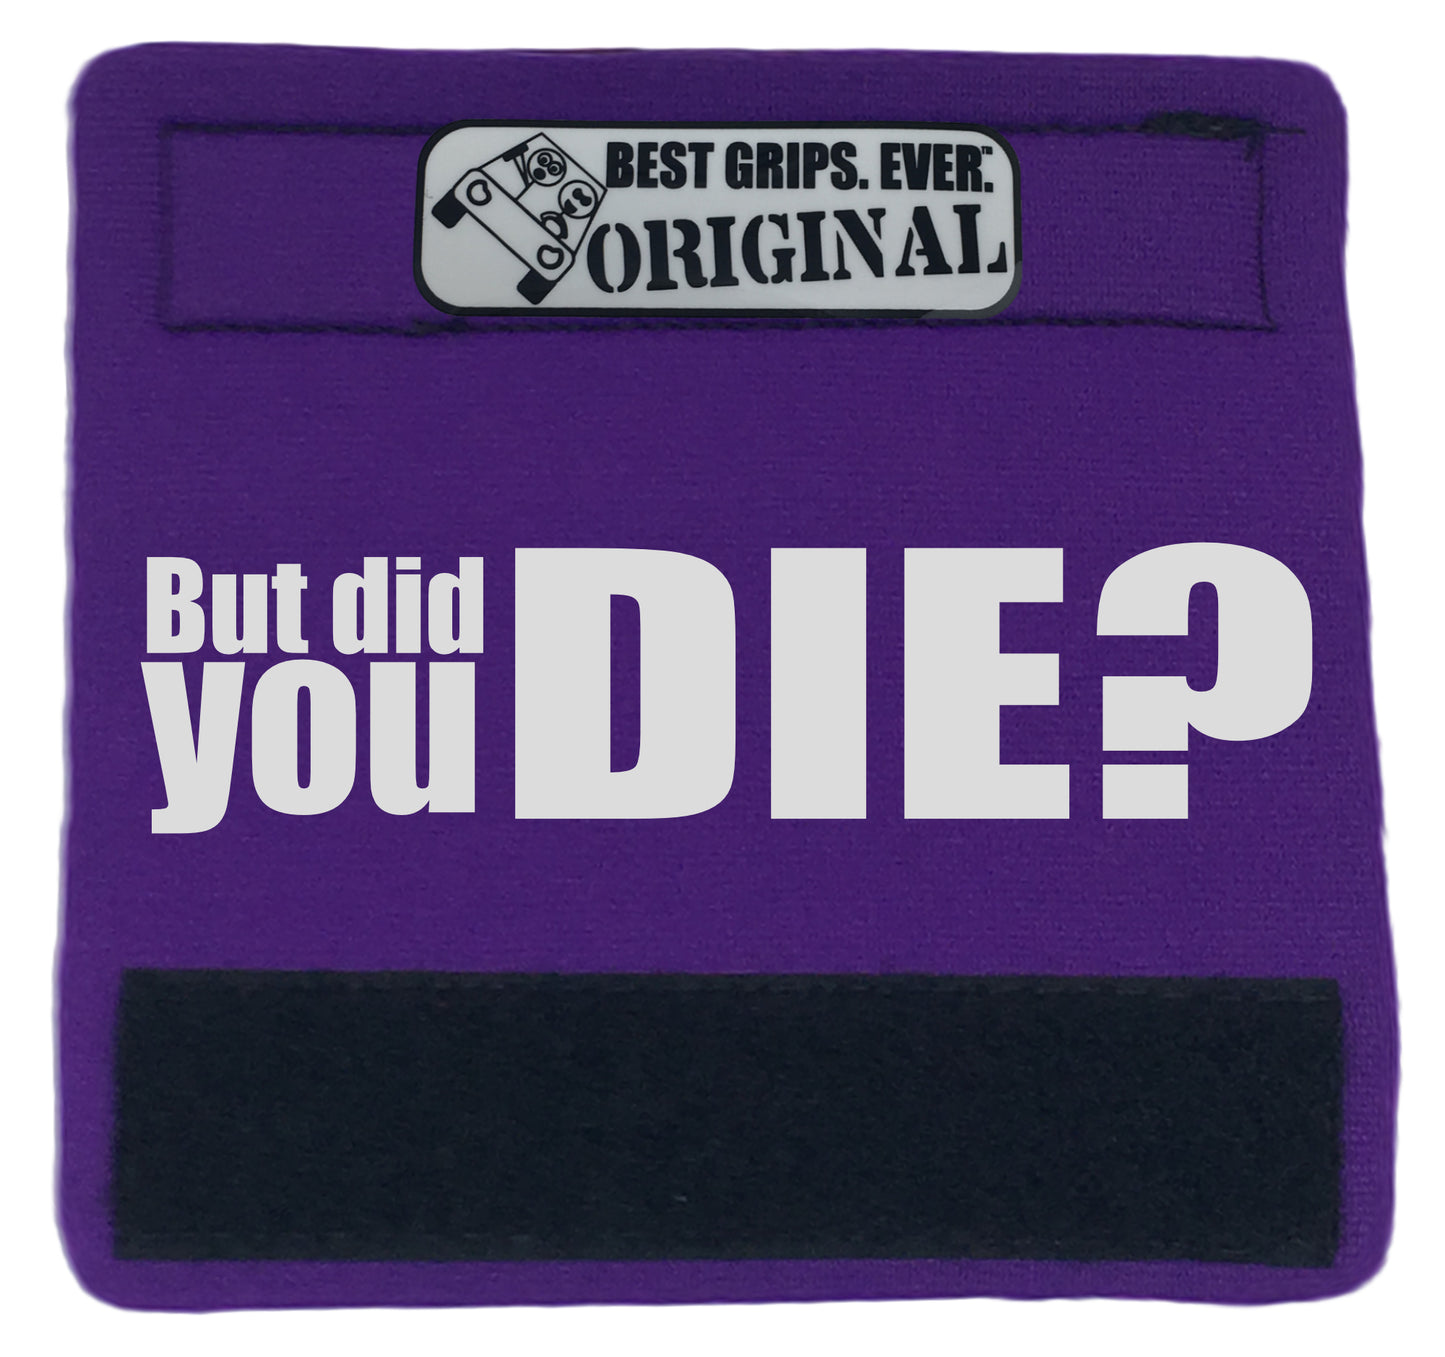 The DID YOU DIE Grip. - BEST GRIPS. EVER.®